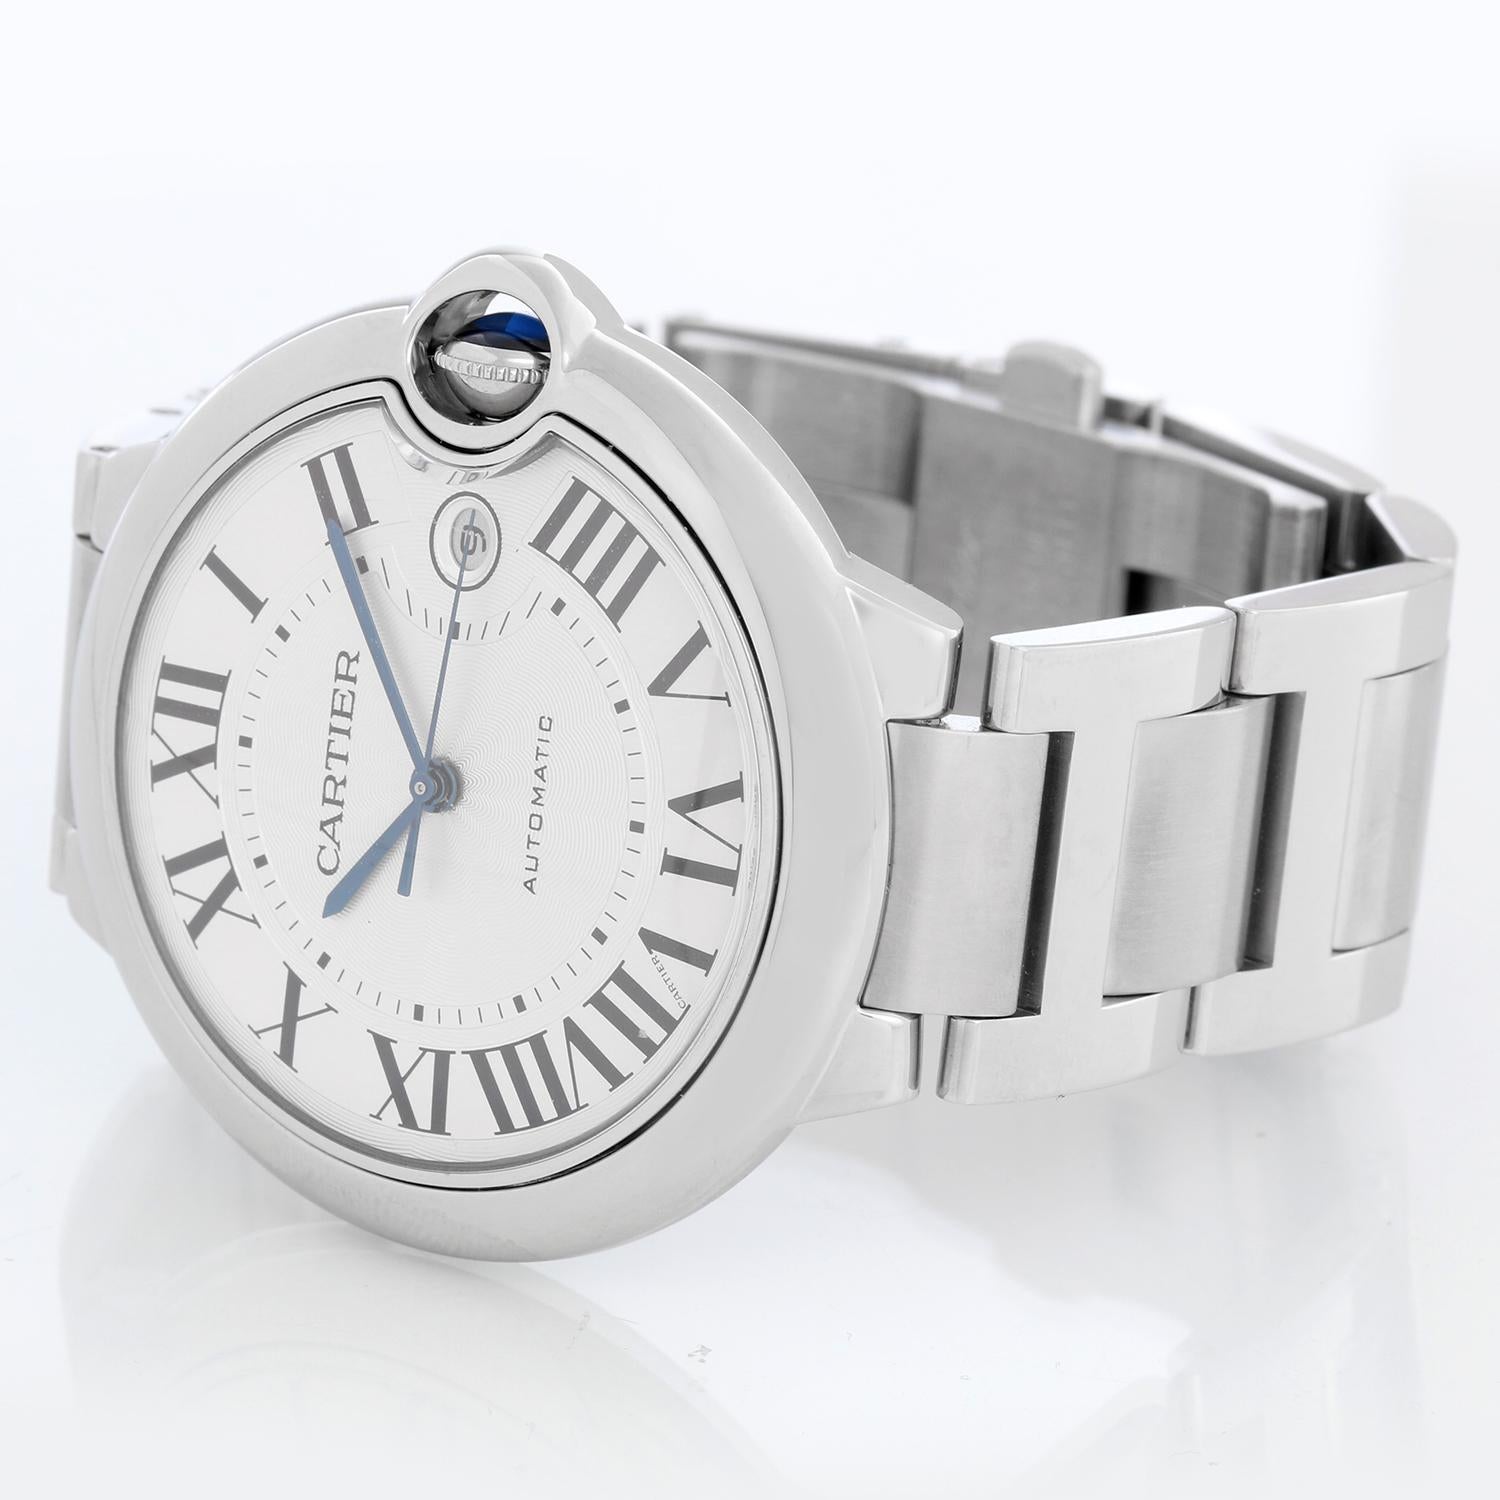 Cartier Ballon Bleu Men's 42mm Stainless Steel Automatic Watch W69012Z4 3001 - Automatic winding. Stainless steel case (42mm diameter). Silver guilloche dial with black Roman numerals; date at 3 o'clock. Stainless steel Cartier bracelet with